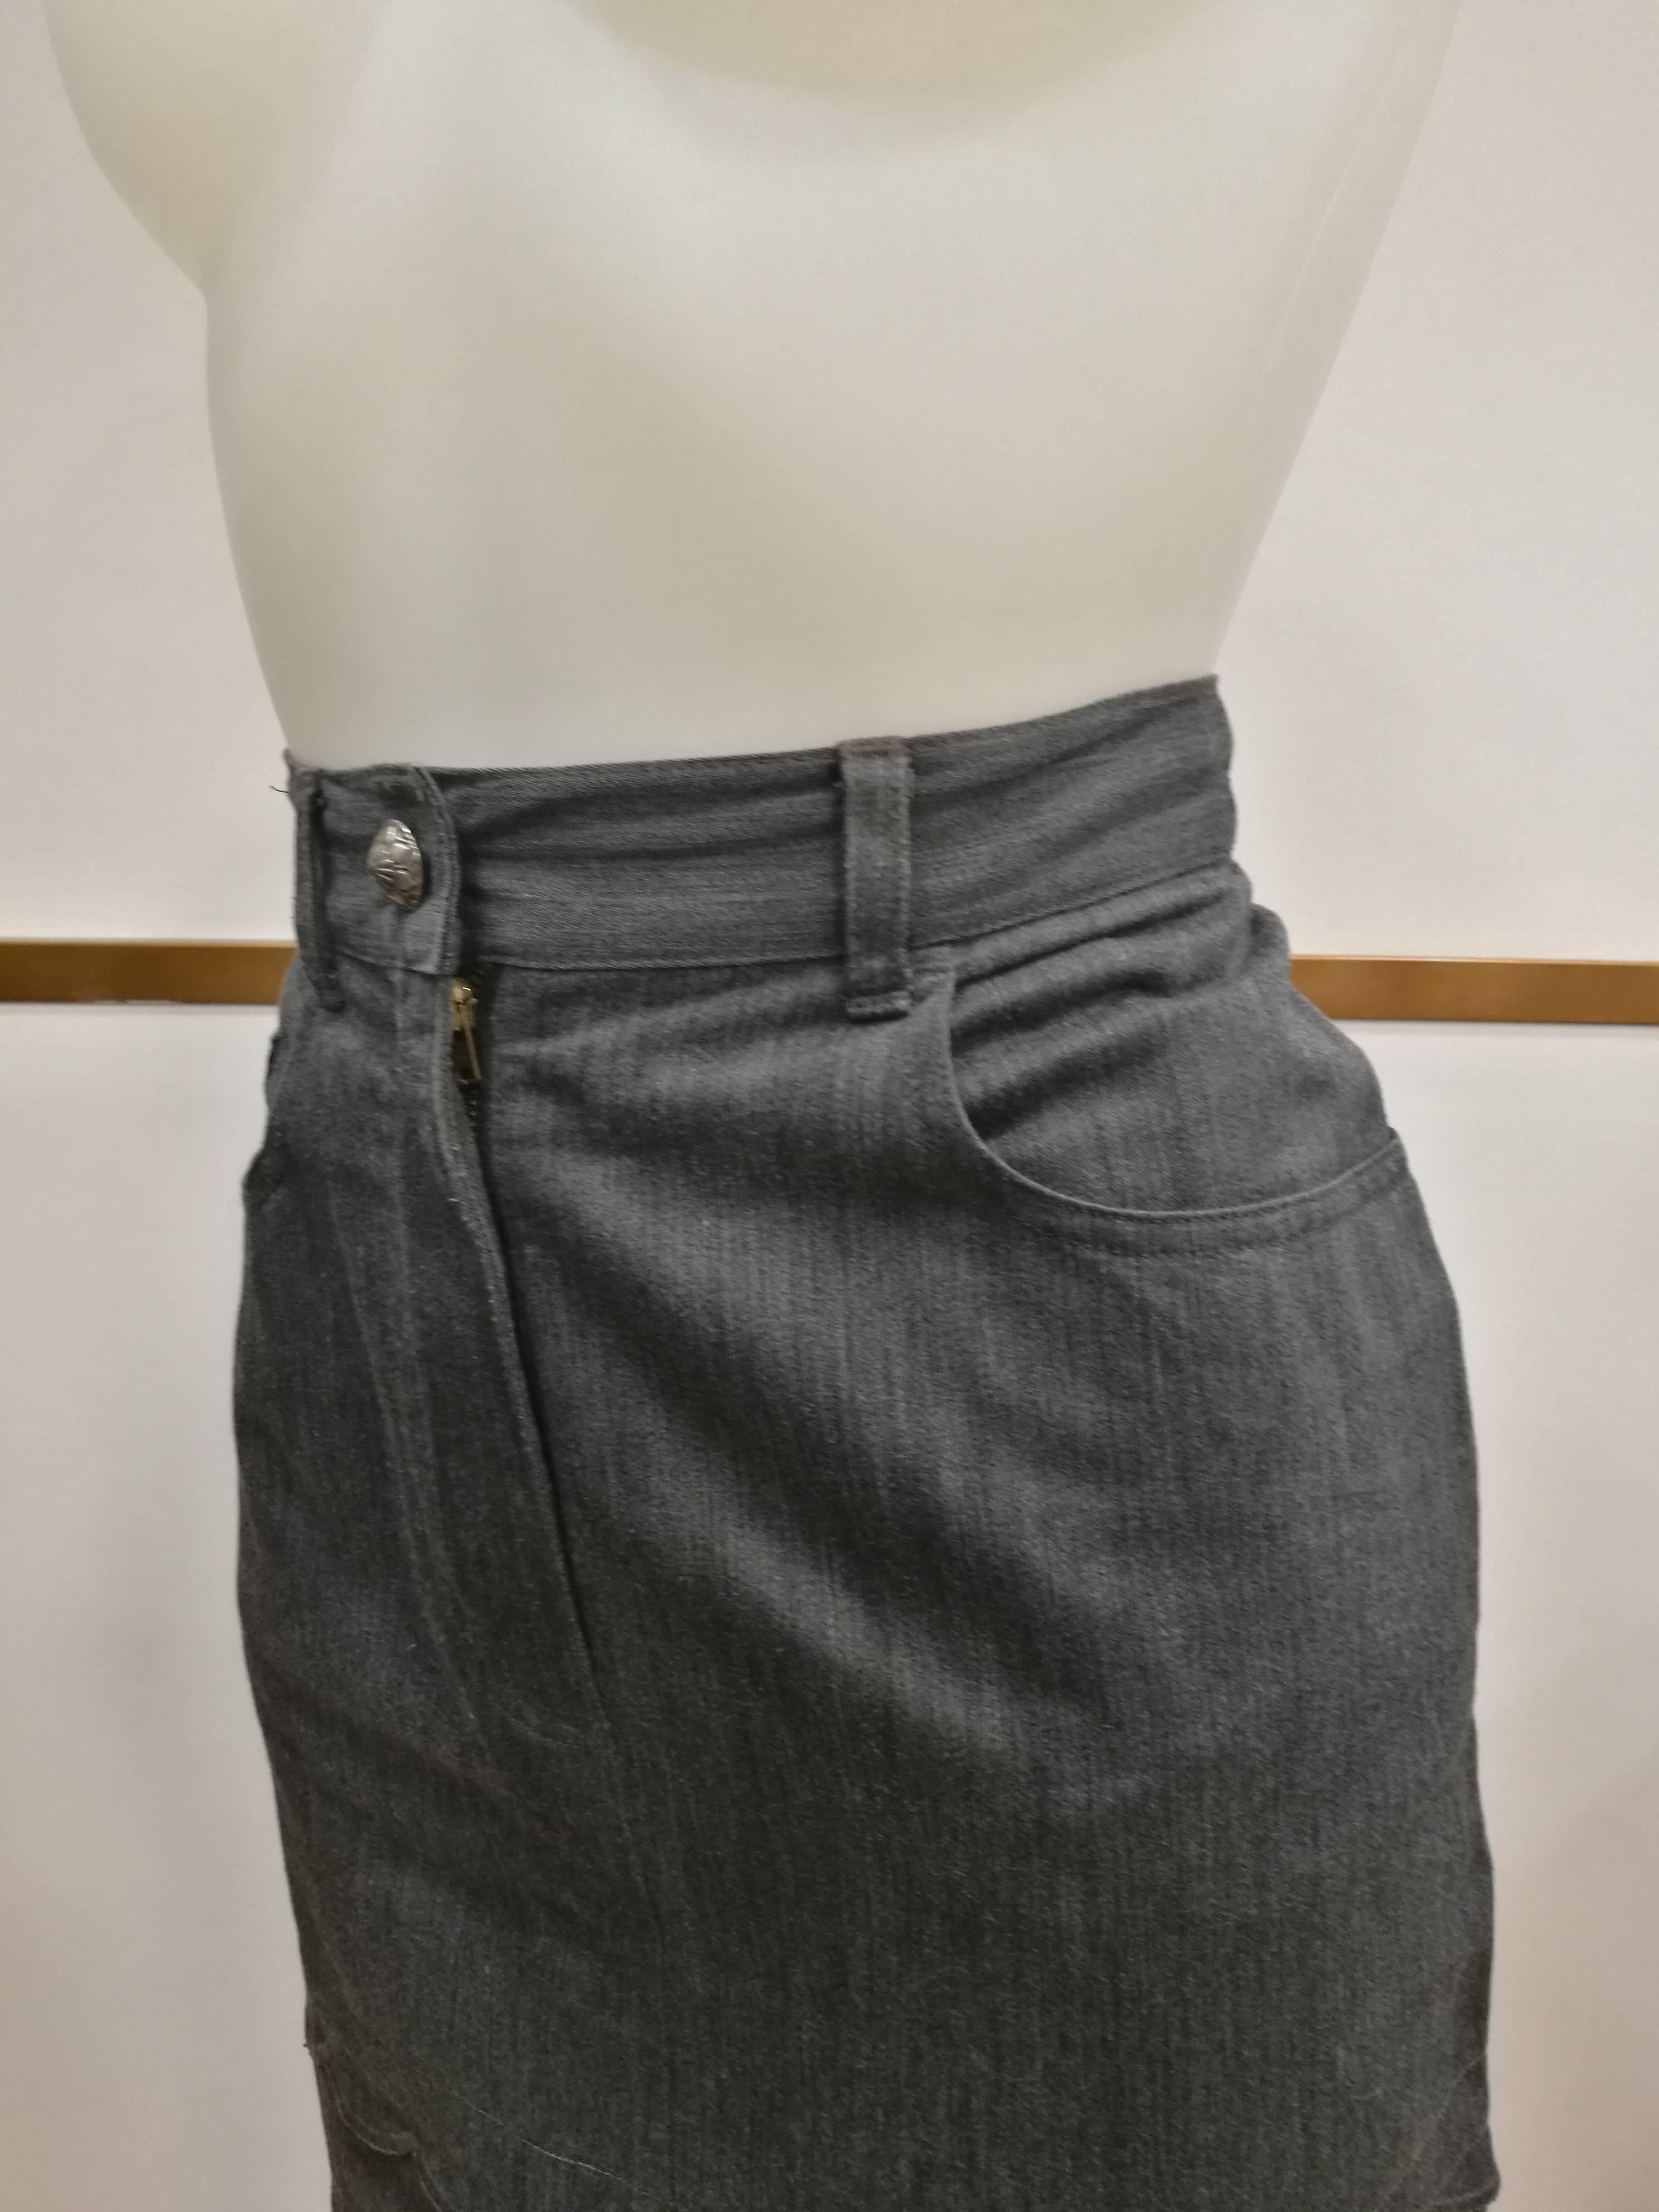 Moschino Jeans Grey Cotton Skirt In Excellent Condition For Sale In Capri, IT